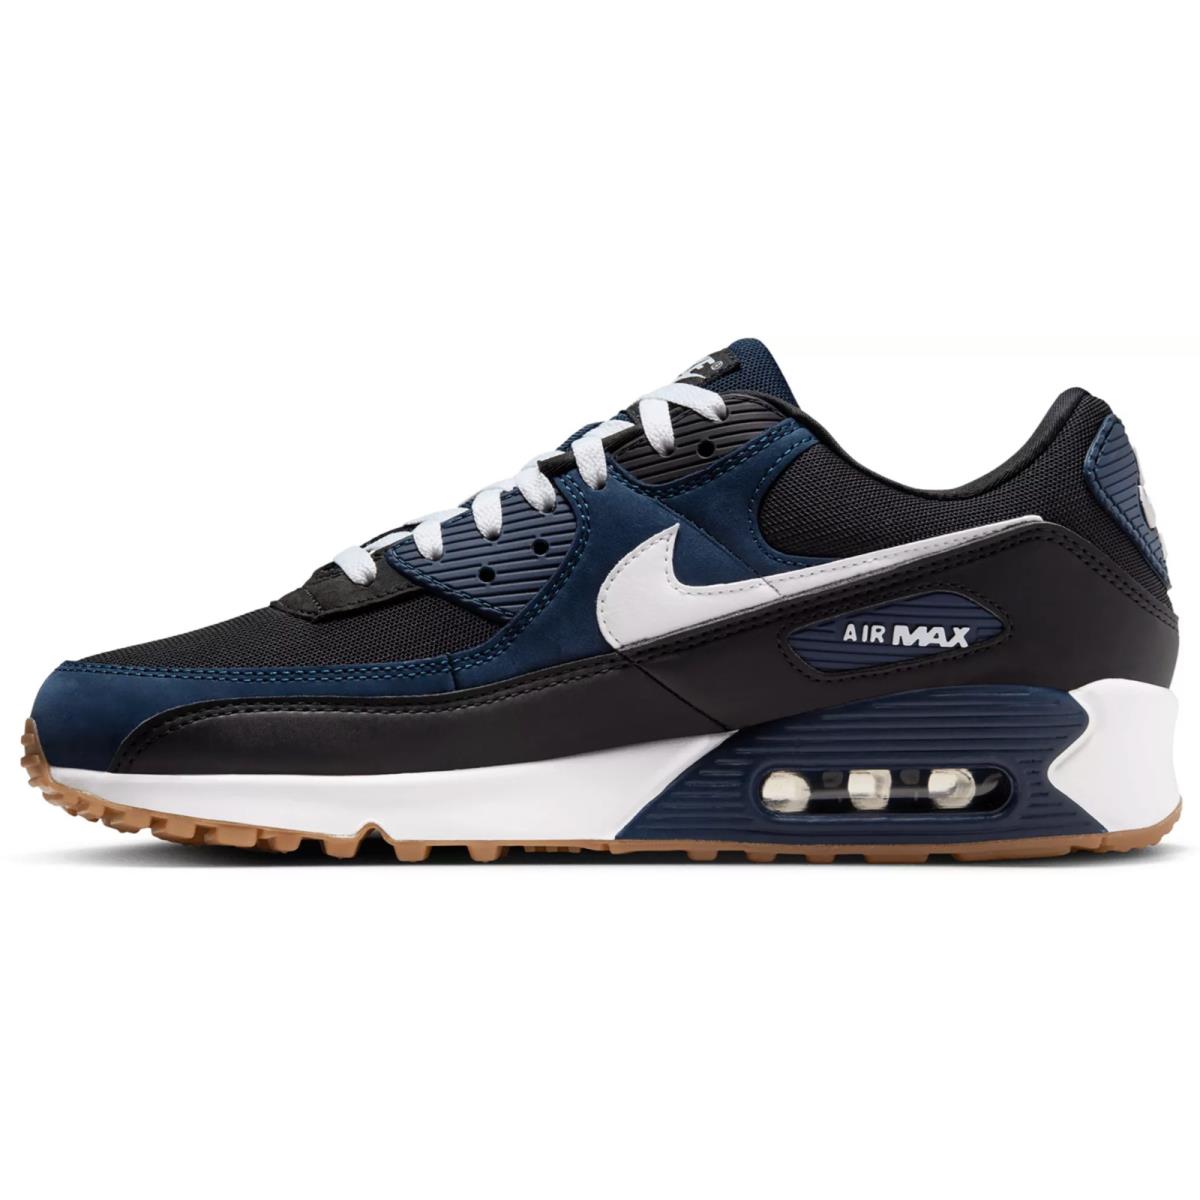 Nike Air Max 90 Men`s Retro Athletic Sneakers Shoes Black Blue All Sizes